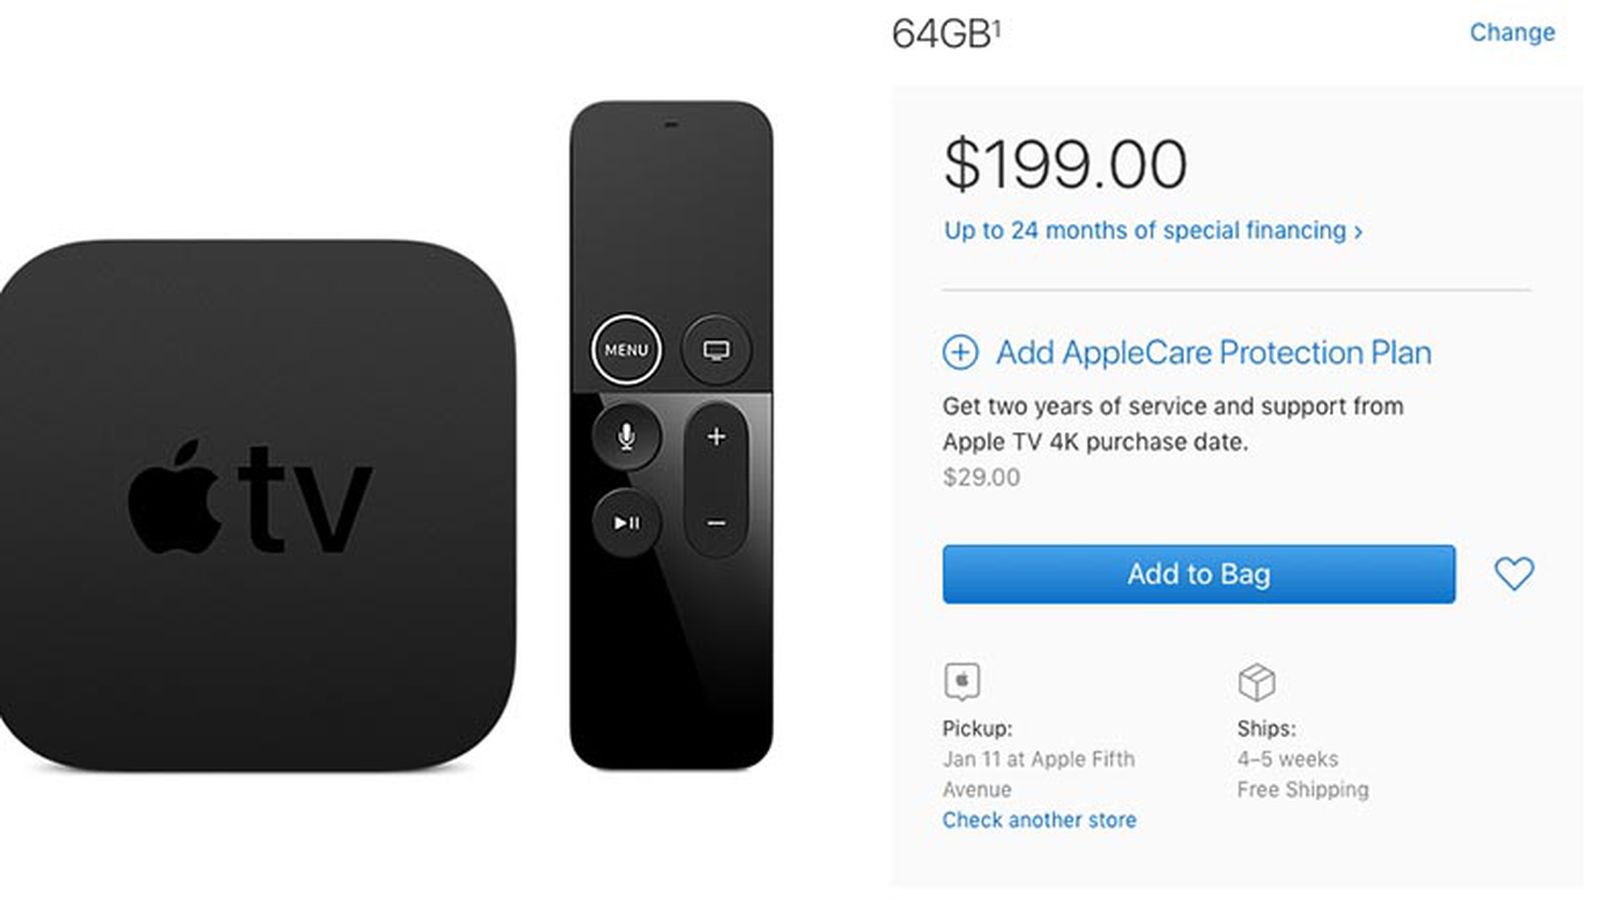 Apple TV 4K With 64GB Storage Faces 4-5 Week Shipping Delay